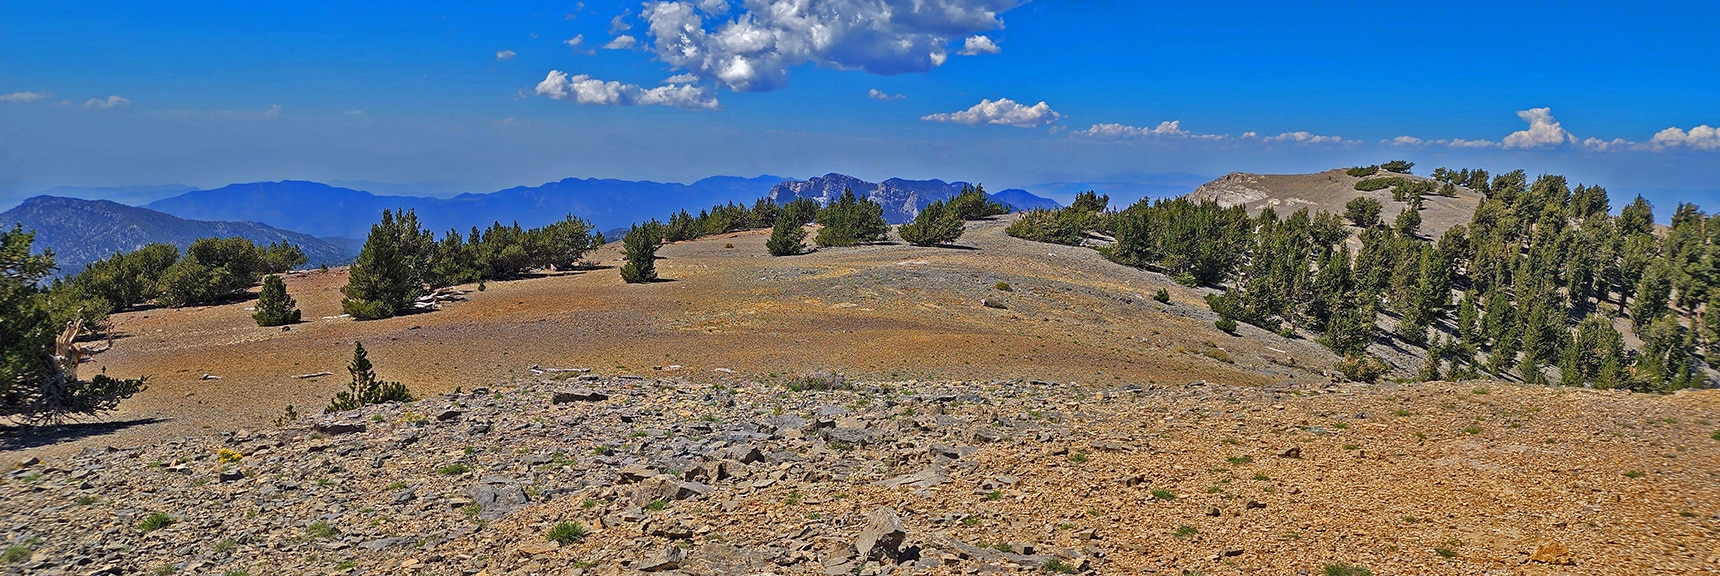 View Toward the Northwestern Portion of Mummy Mountain's Massive Summit | Mummy Mountain Grand Crossing | Lee Canyon to Deer Creek Road | Mt Charleston Wilderness | Spring Mountains, Nevada |